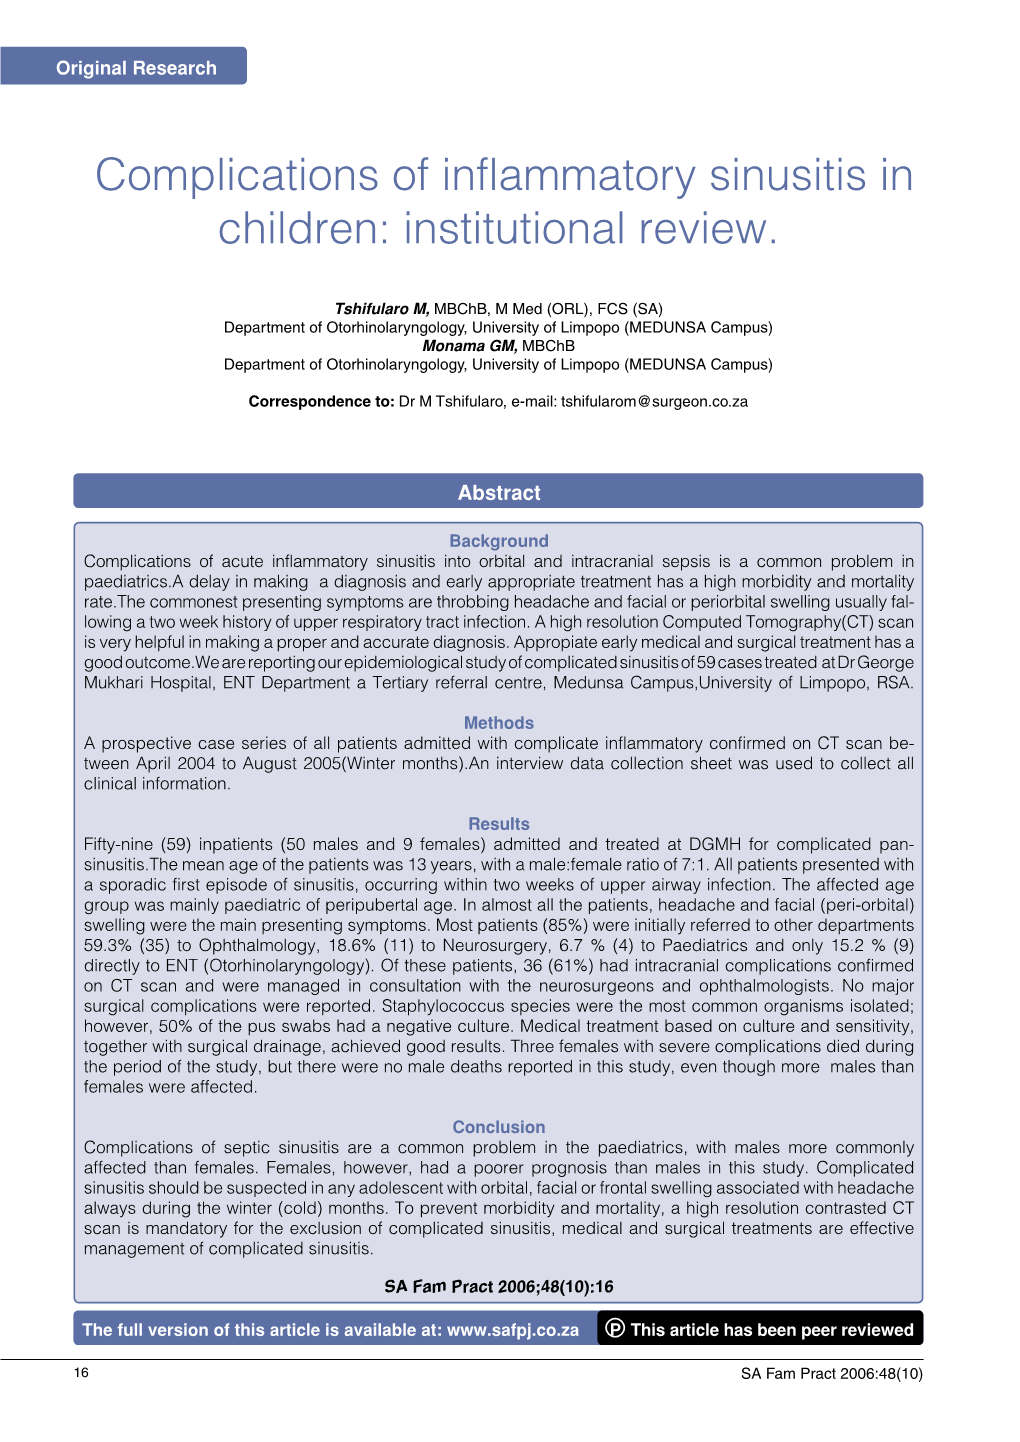 Complications of Inflammatory Sinusitis in Children: Institutional Review